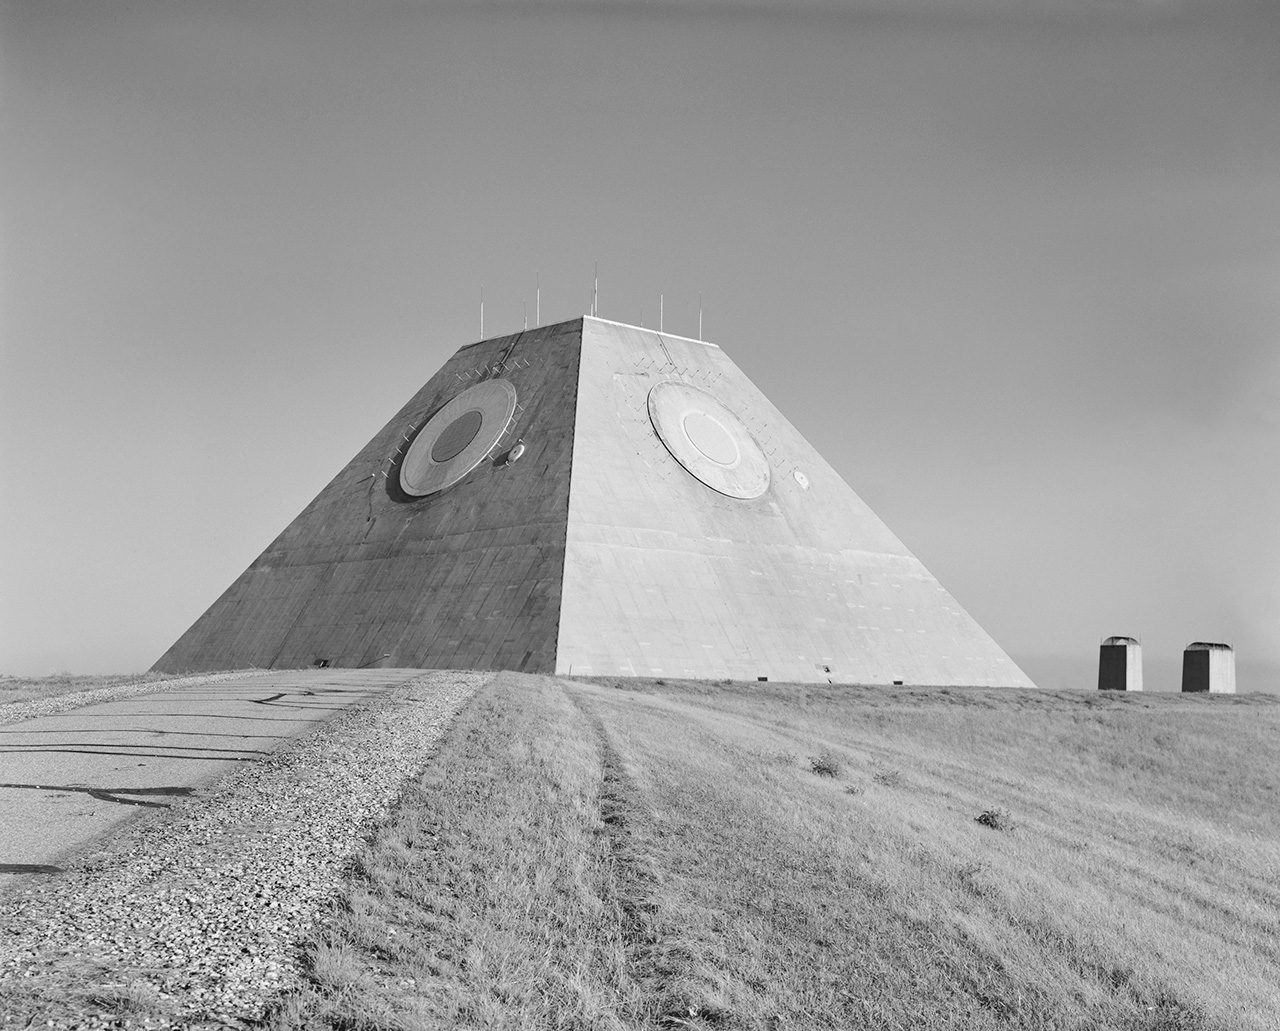 A Pyramid In The Middle Of Nowhere Built To Track The End Of The World